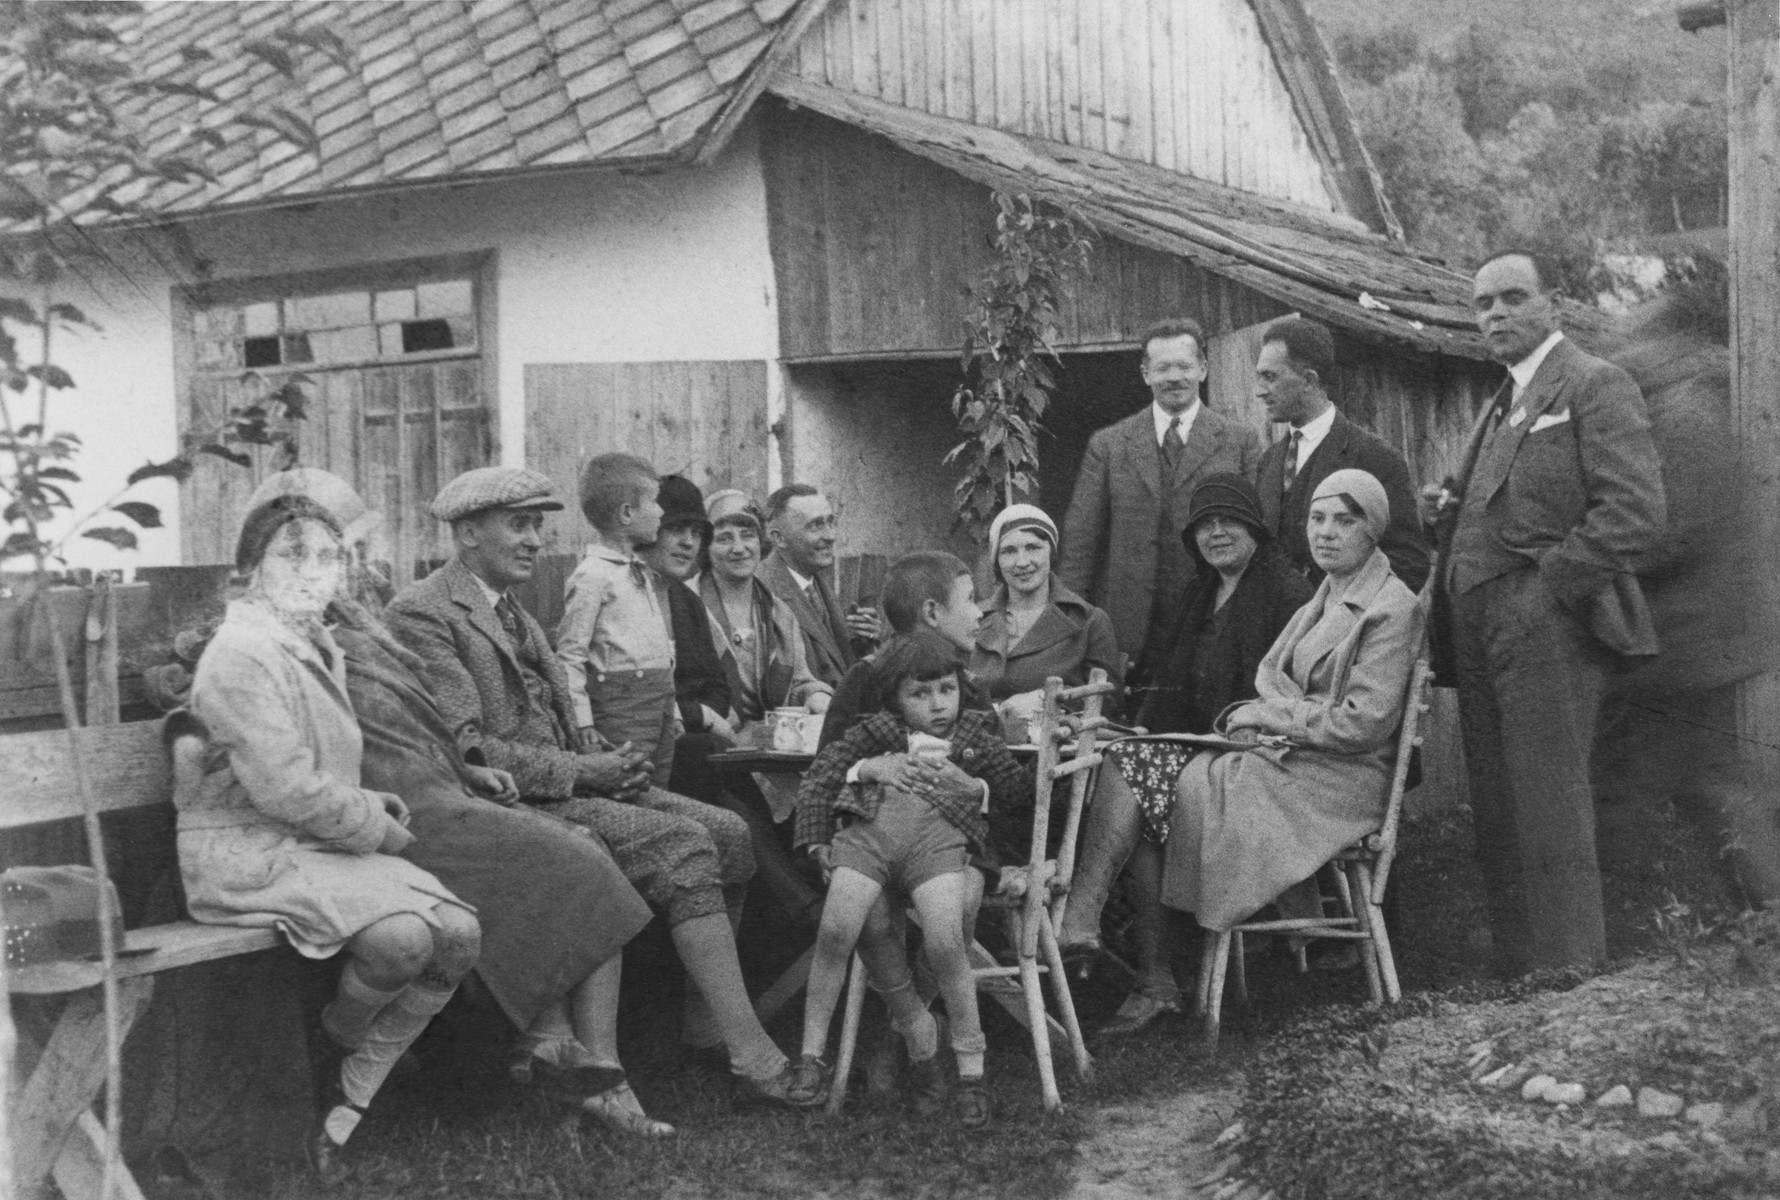 Lotte Gottfried (left) attends a social gathering at the home of the Offners, a Romanian family in Czernowitz.  

She was escorted to the party by a family friend, Dr. Brilliant (standing third from the right).  Brilliant became a Nazi supporter after a trip to Berlin in 1938 and abruptly terminated his long standing friendship with the Gottfrieds.